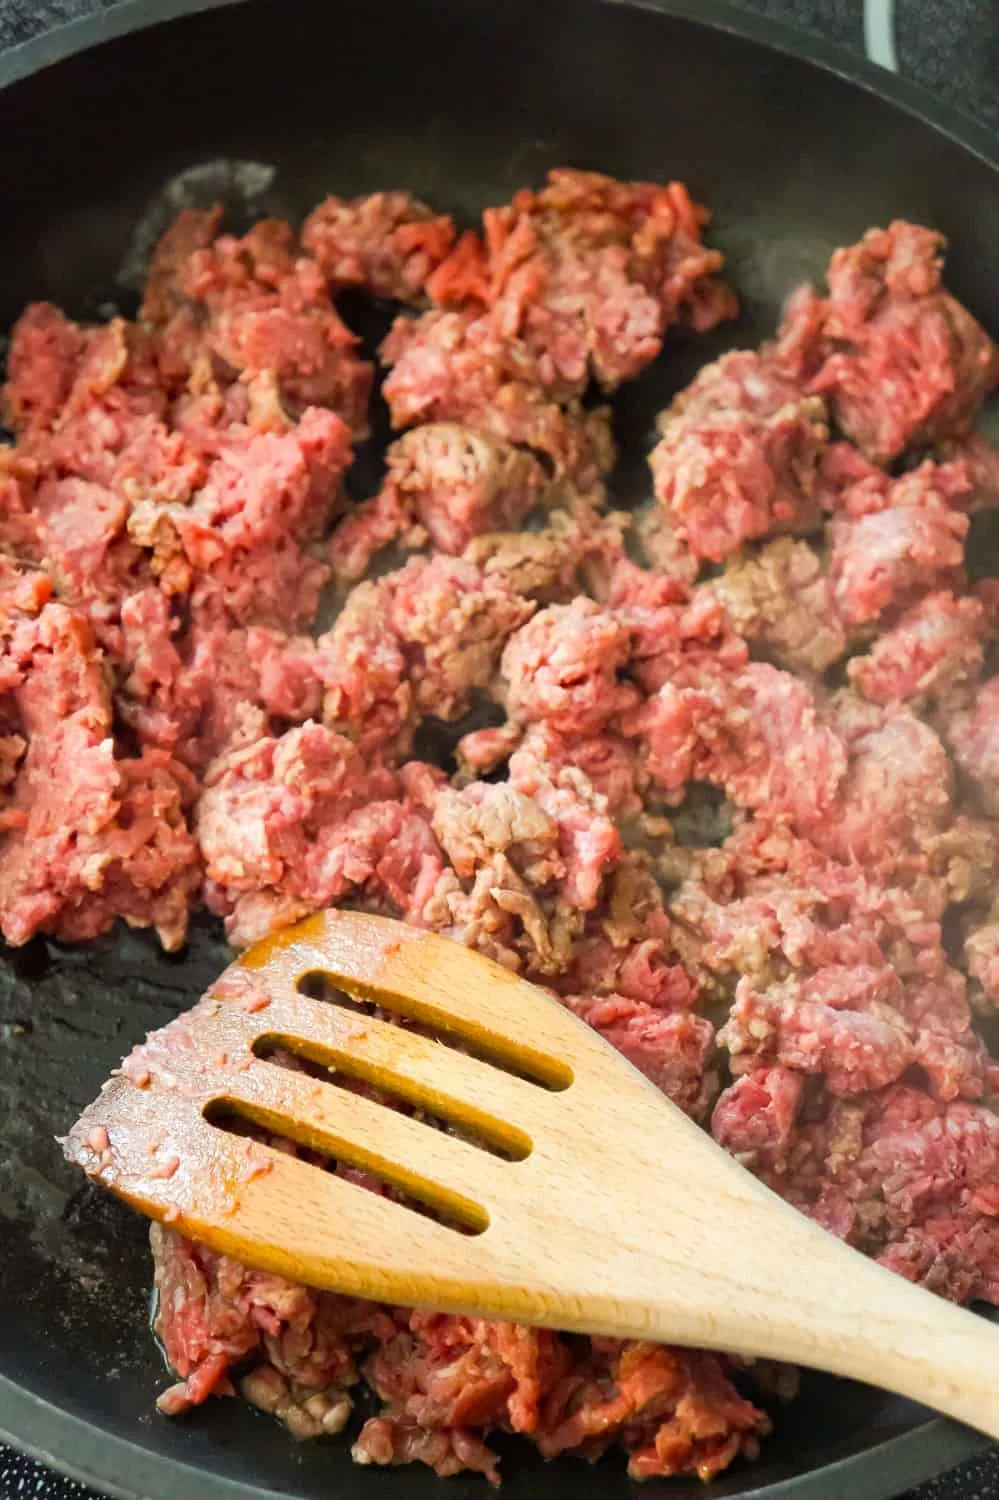 raw ground beef cooking in a frying pan